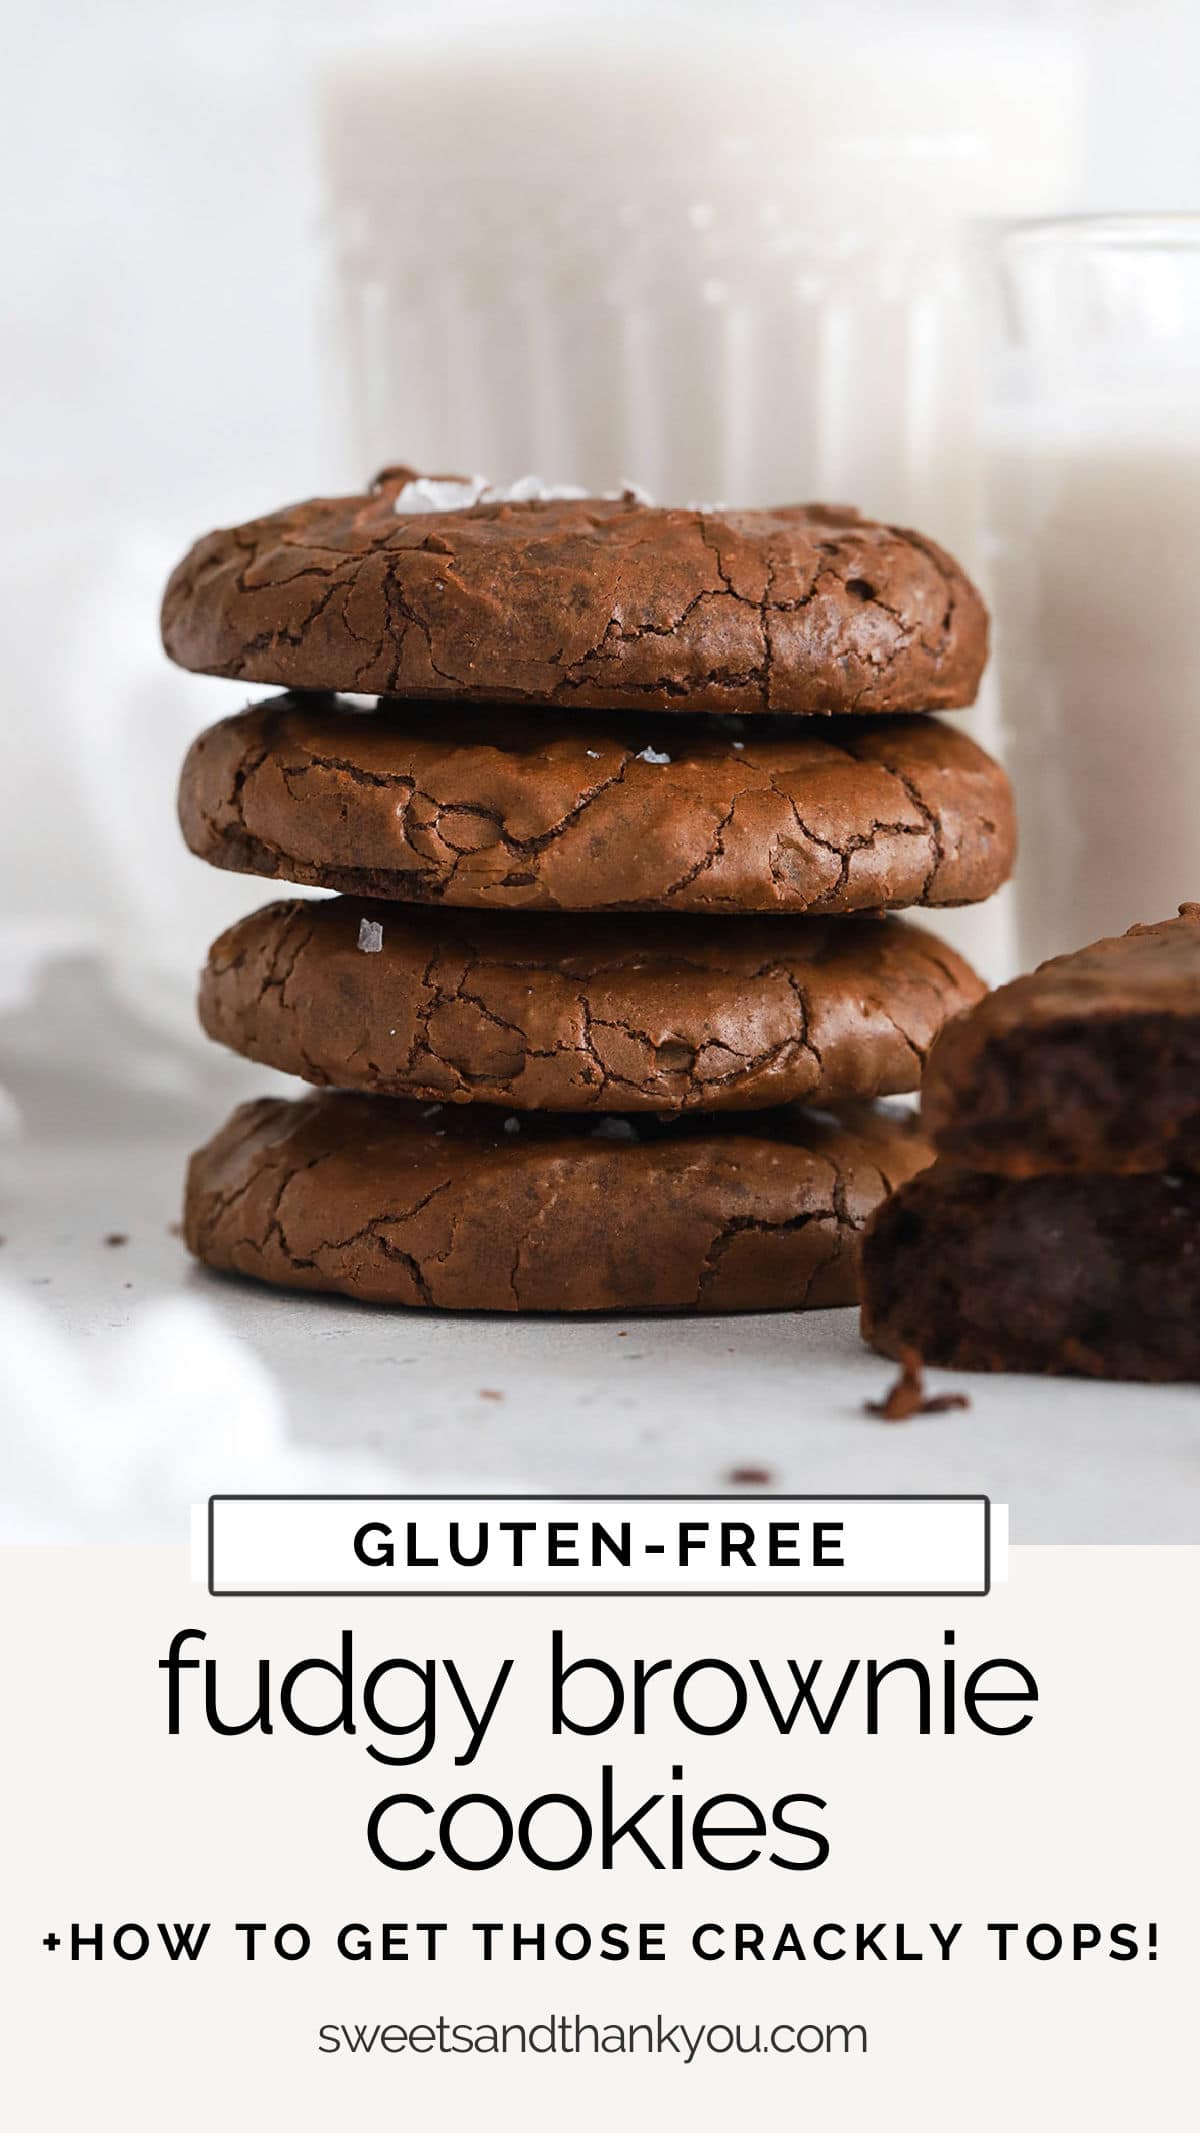 Gluten-Free Brownie Cookies - These fudgy chocolate brownie cookies are magically gluten-free, taste amazing & come together in minutes! // Gluten-free Chocolate Brownie Cookies // Gluten-Free Fudgy Brownie Cookies // Gluten-Free Brookies // Gluten-Free Brownie Cookie Recipe // gluten free cookies // easy gluten-free chocolate cookies // fudgy chocolate cookies // gluten-free brownie cookie // ice cream sandwich cookies